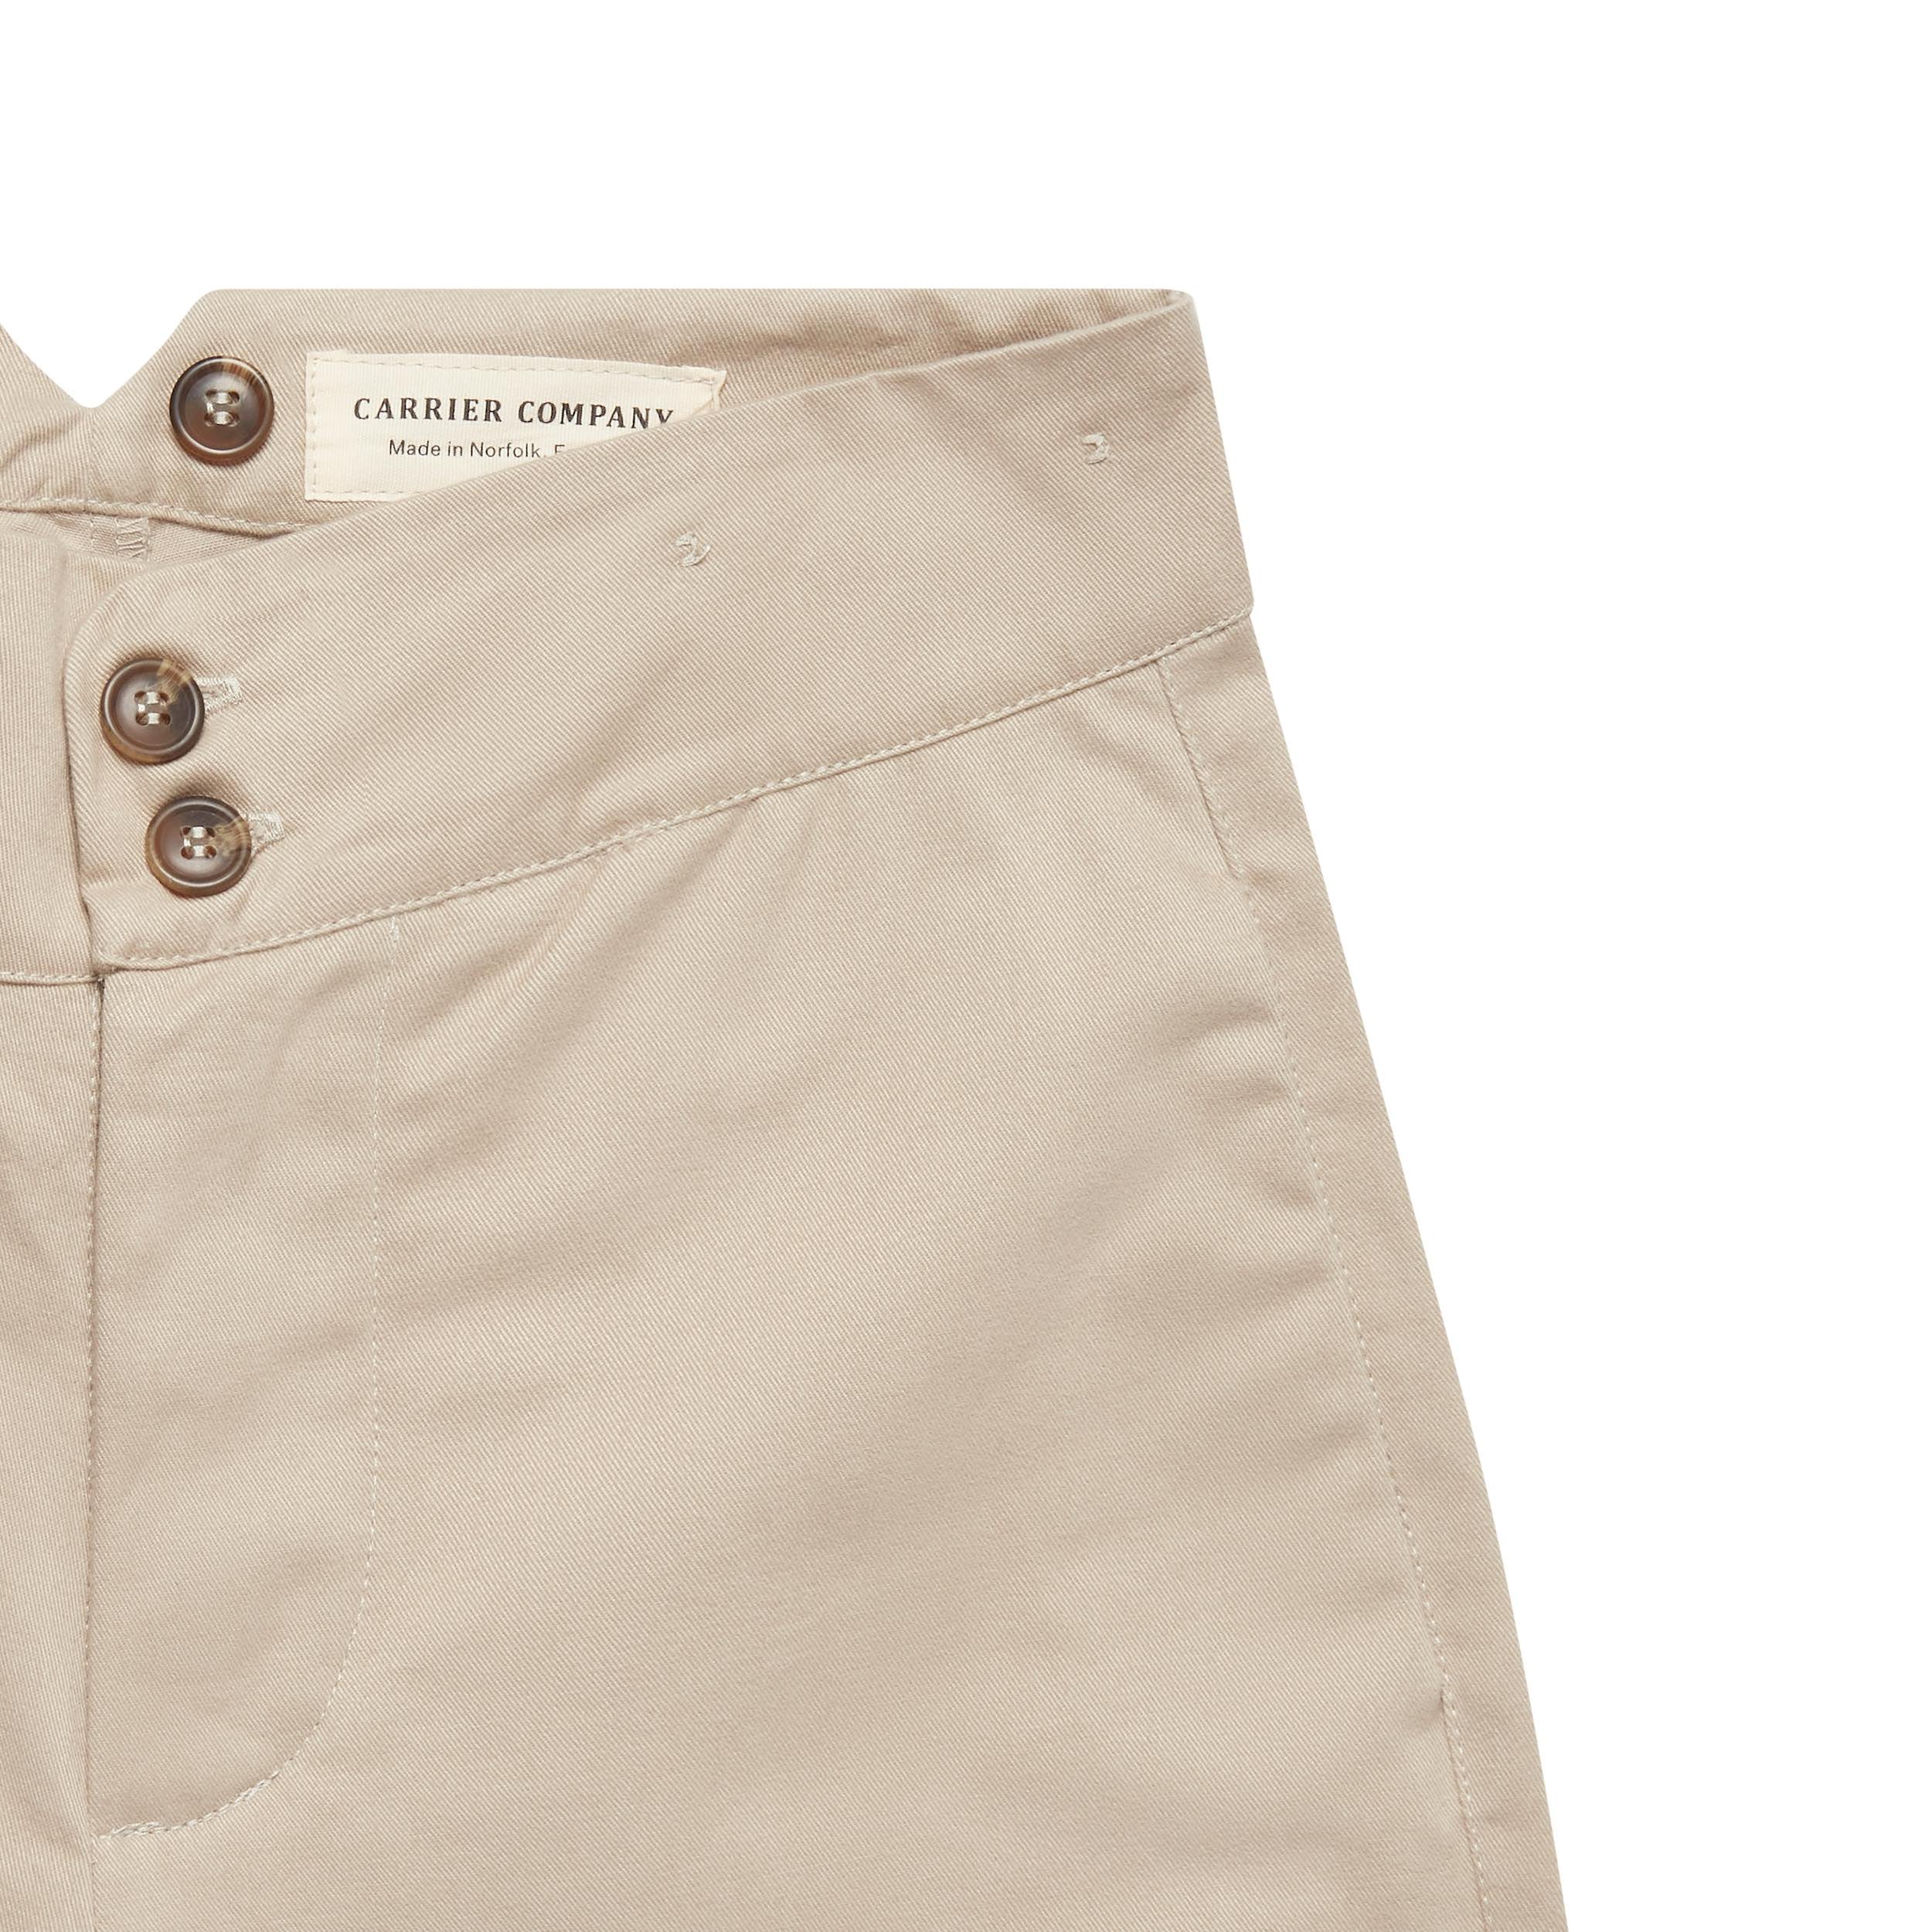 Carrier Company Colonial Trouser in Stone